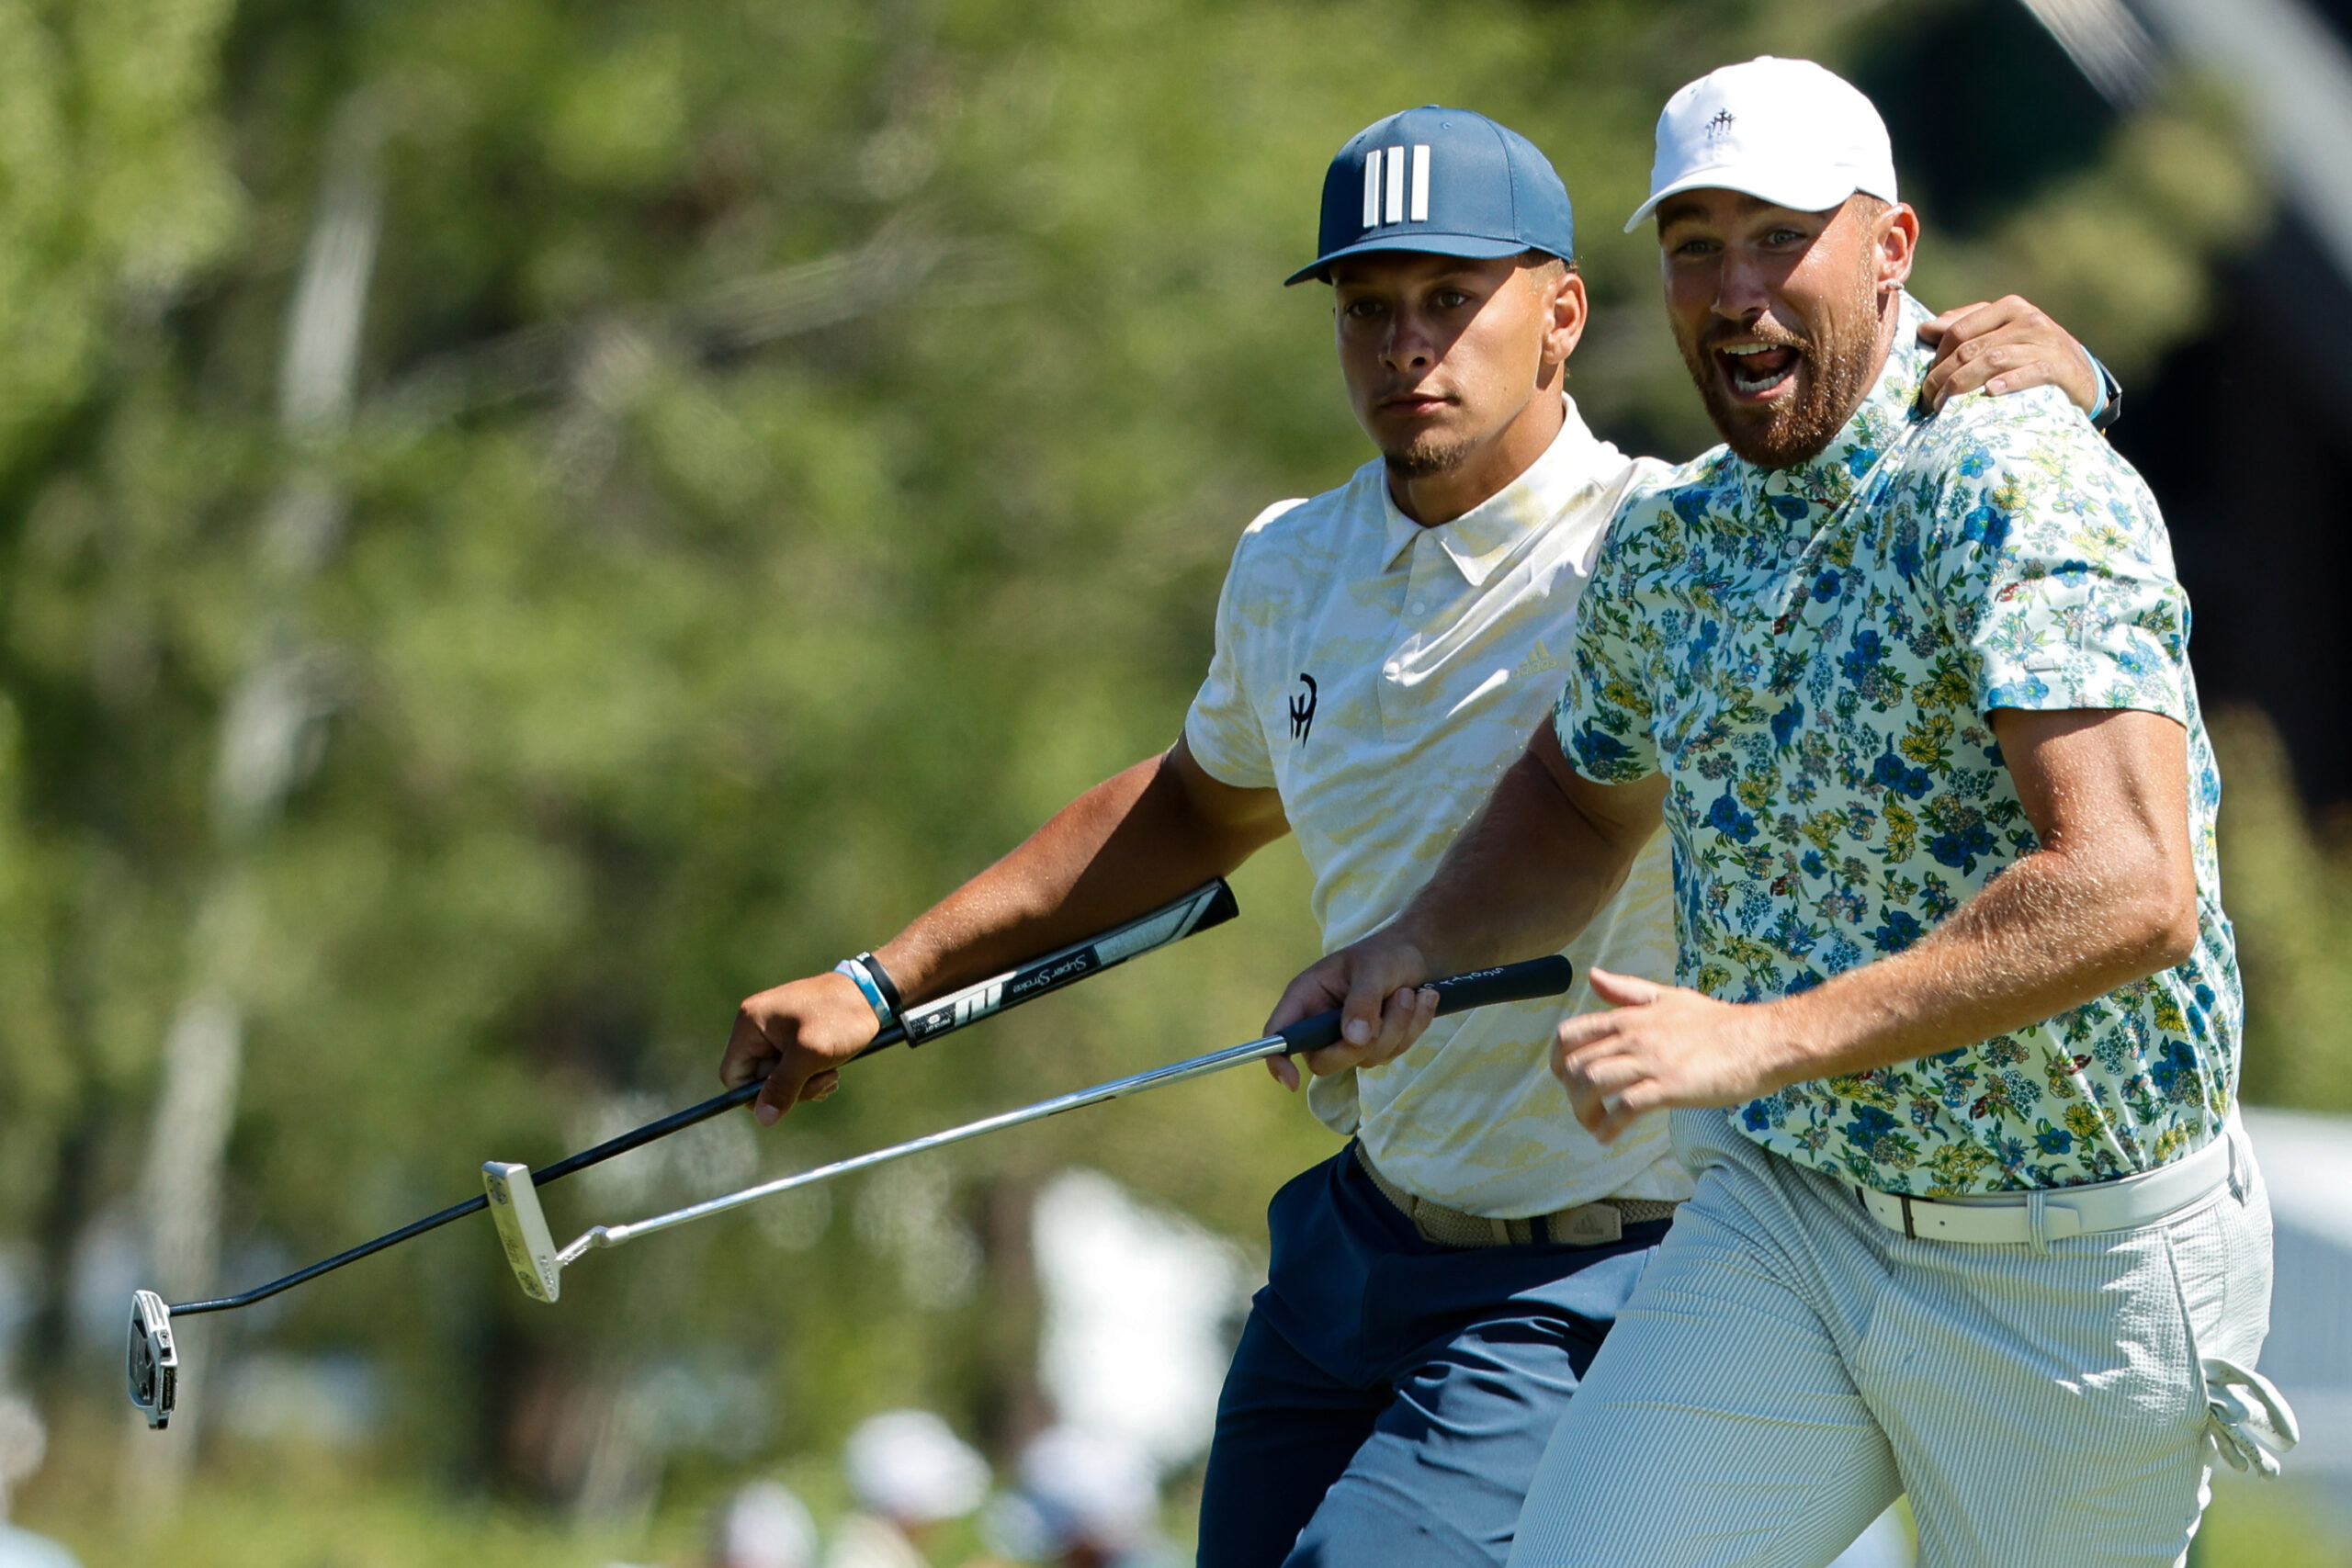 Patrick Mahomes, Travis Kelce win celebrity golf match against Steph Curry, Klay Thompson; Mahomes was also on brand, too, using the event as another example of the value of teamwork.